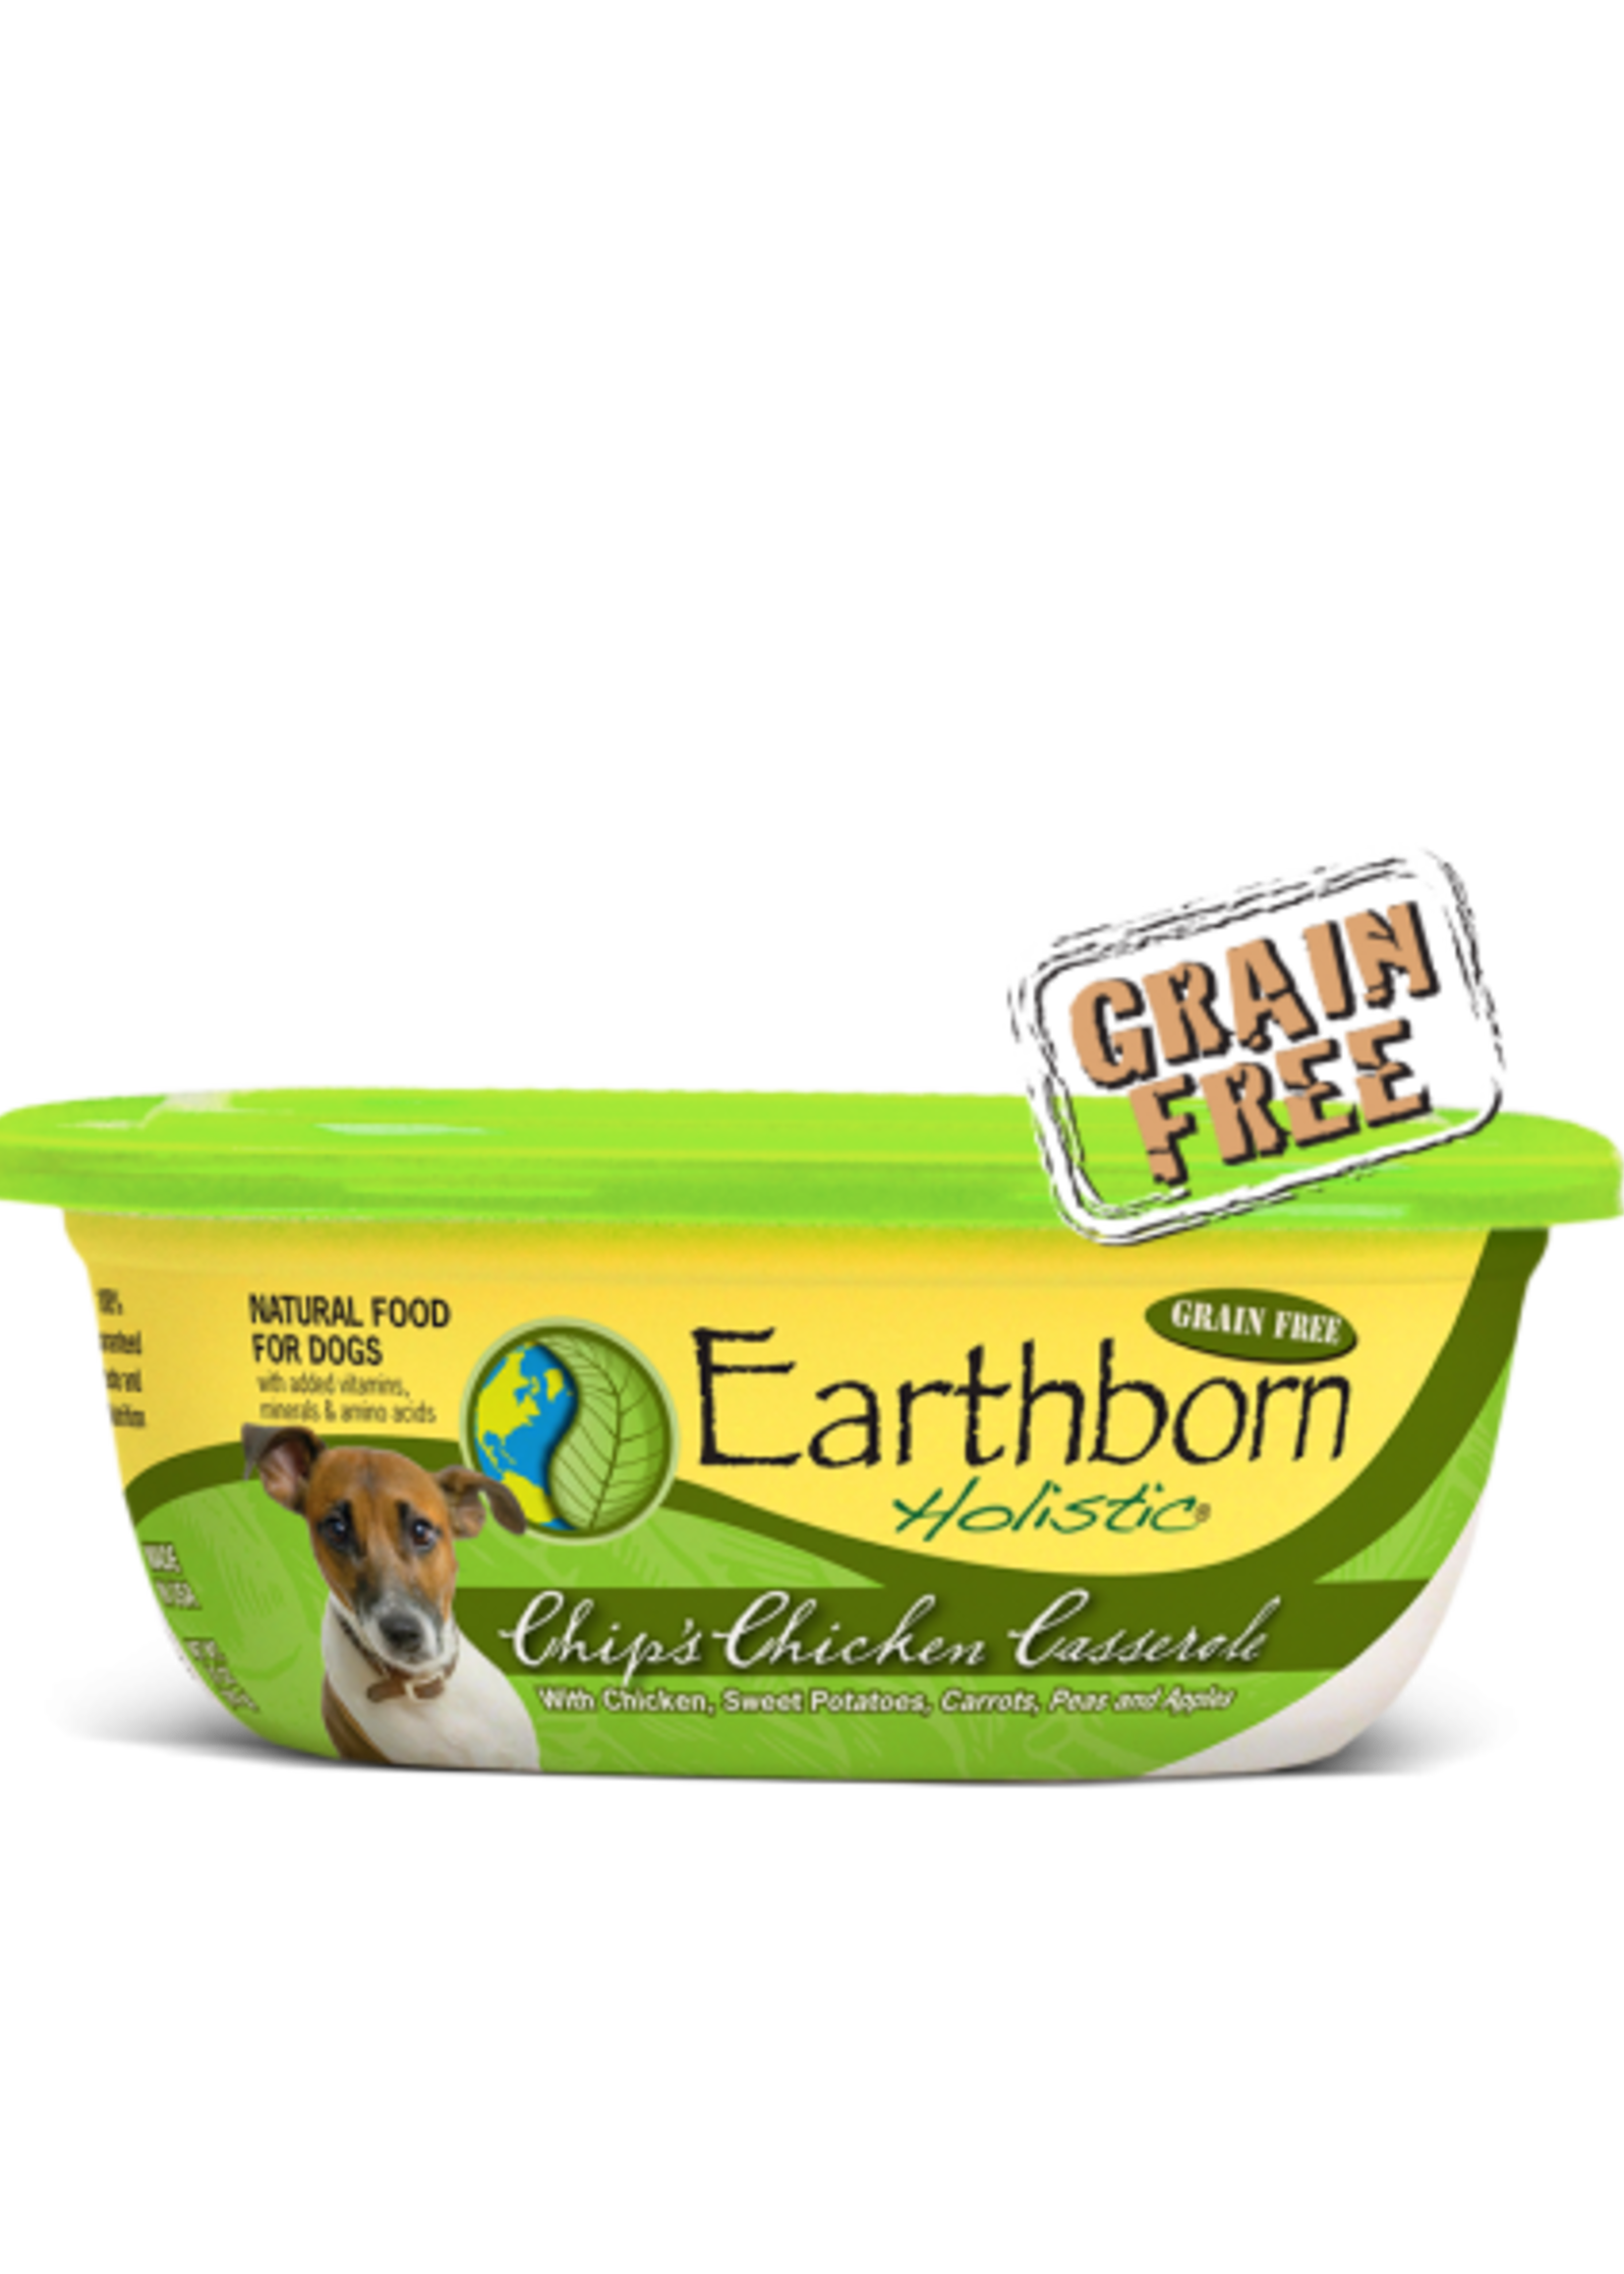 Earthborn by Midwestern Pet Earthborn Dog Can Holistic Chip's Chicken Casserole 8 oz